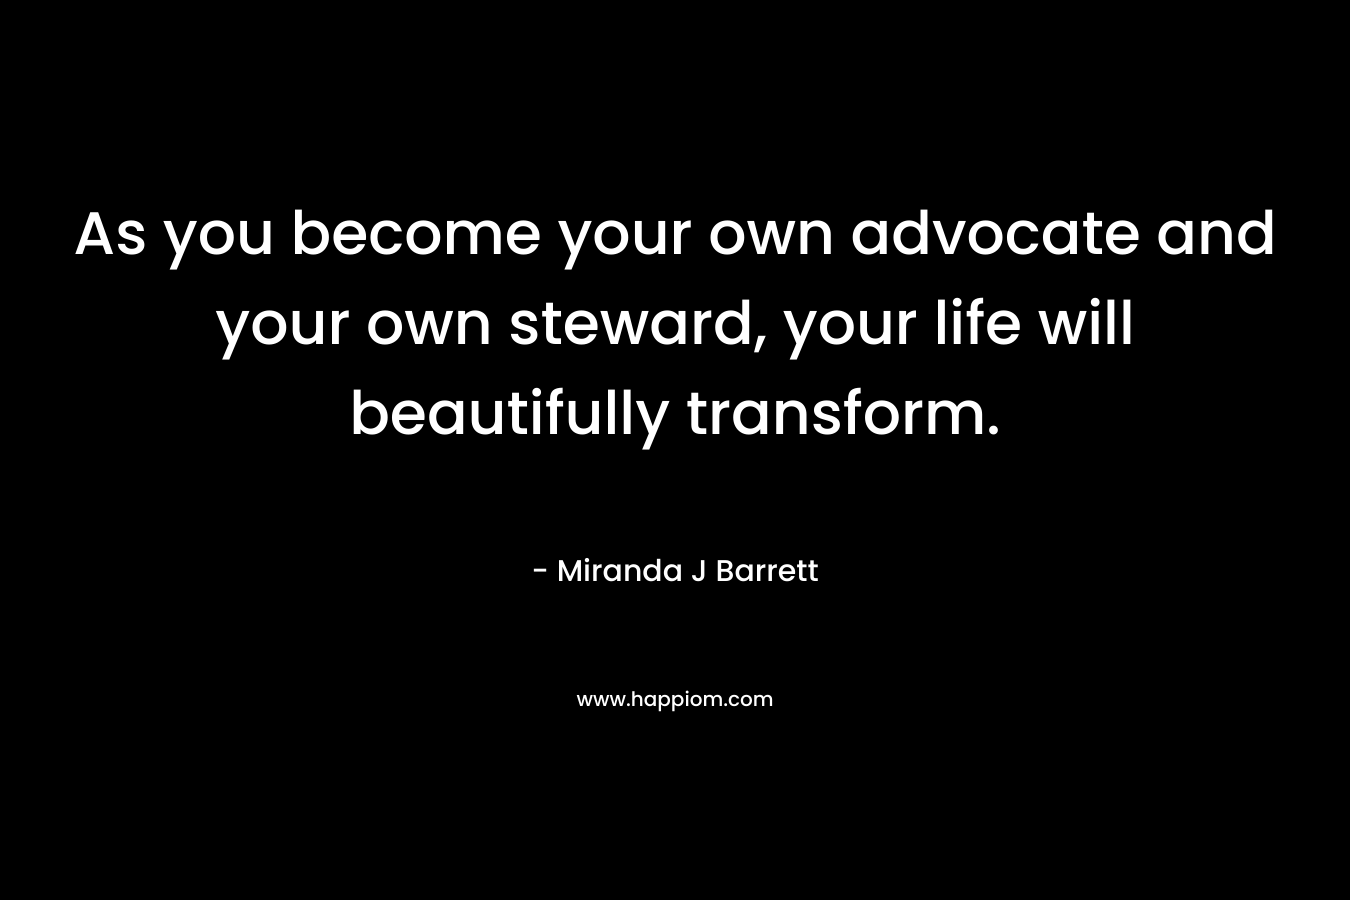 As you become your own advocate and your own steward, your life will beautifully transform.